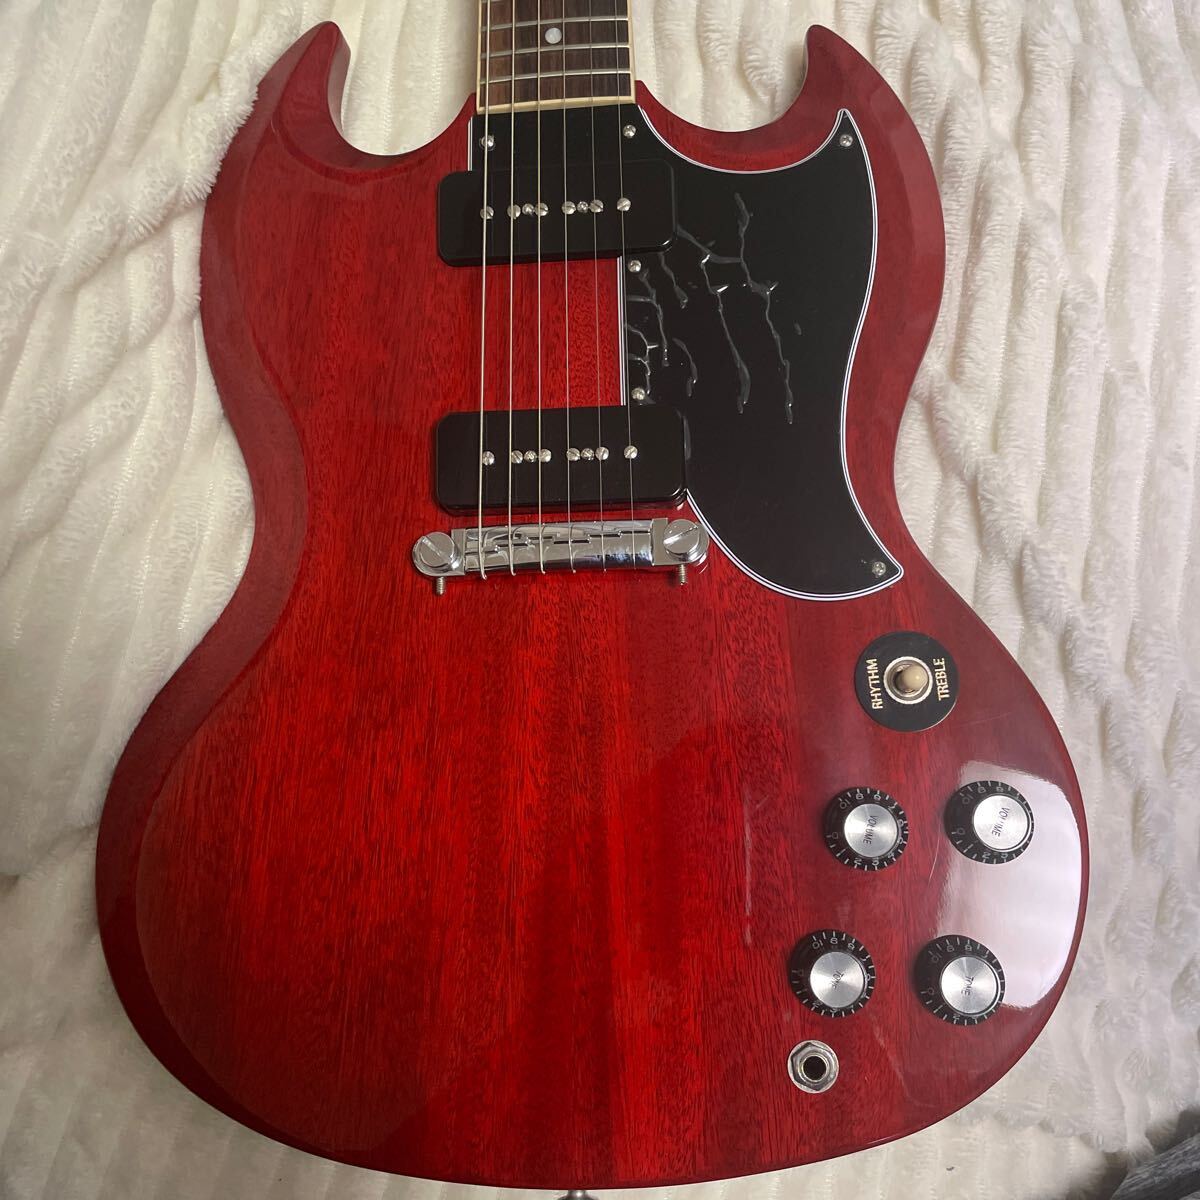 Gibson SG Special (Vintage Cherry) Gibsonボディバッグプレゼント！の画像3